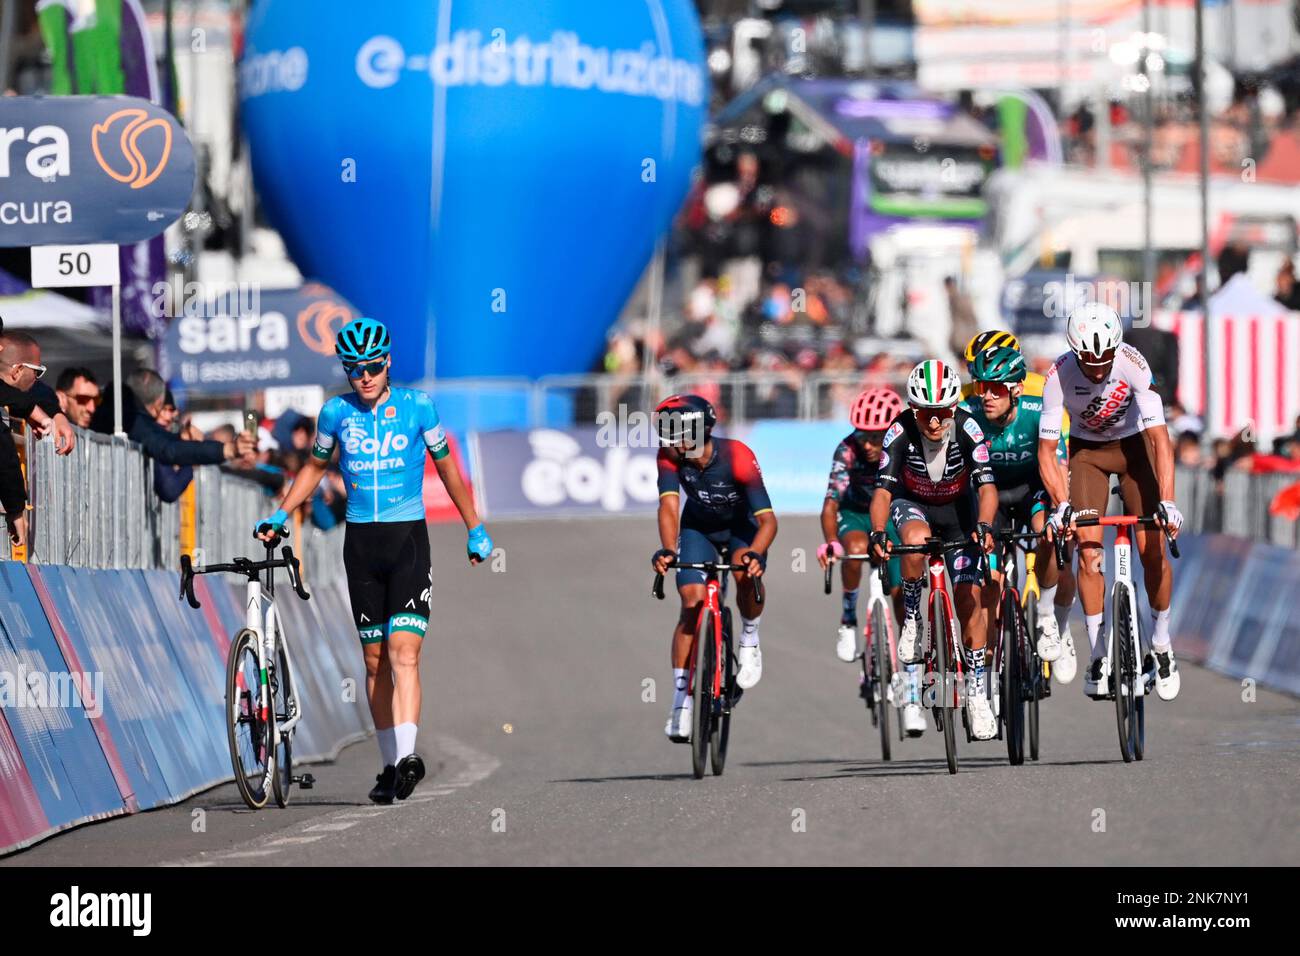 Hungary's Erik Fetter, left, walks with his bicycle at the finish line of  the fourth stage of the Giro D'Italia cycling race from Avola to  Etna-Nicolosi, Italy, Tuesday, May 10, 2022. (Massimo